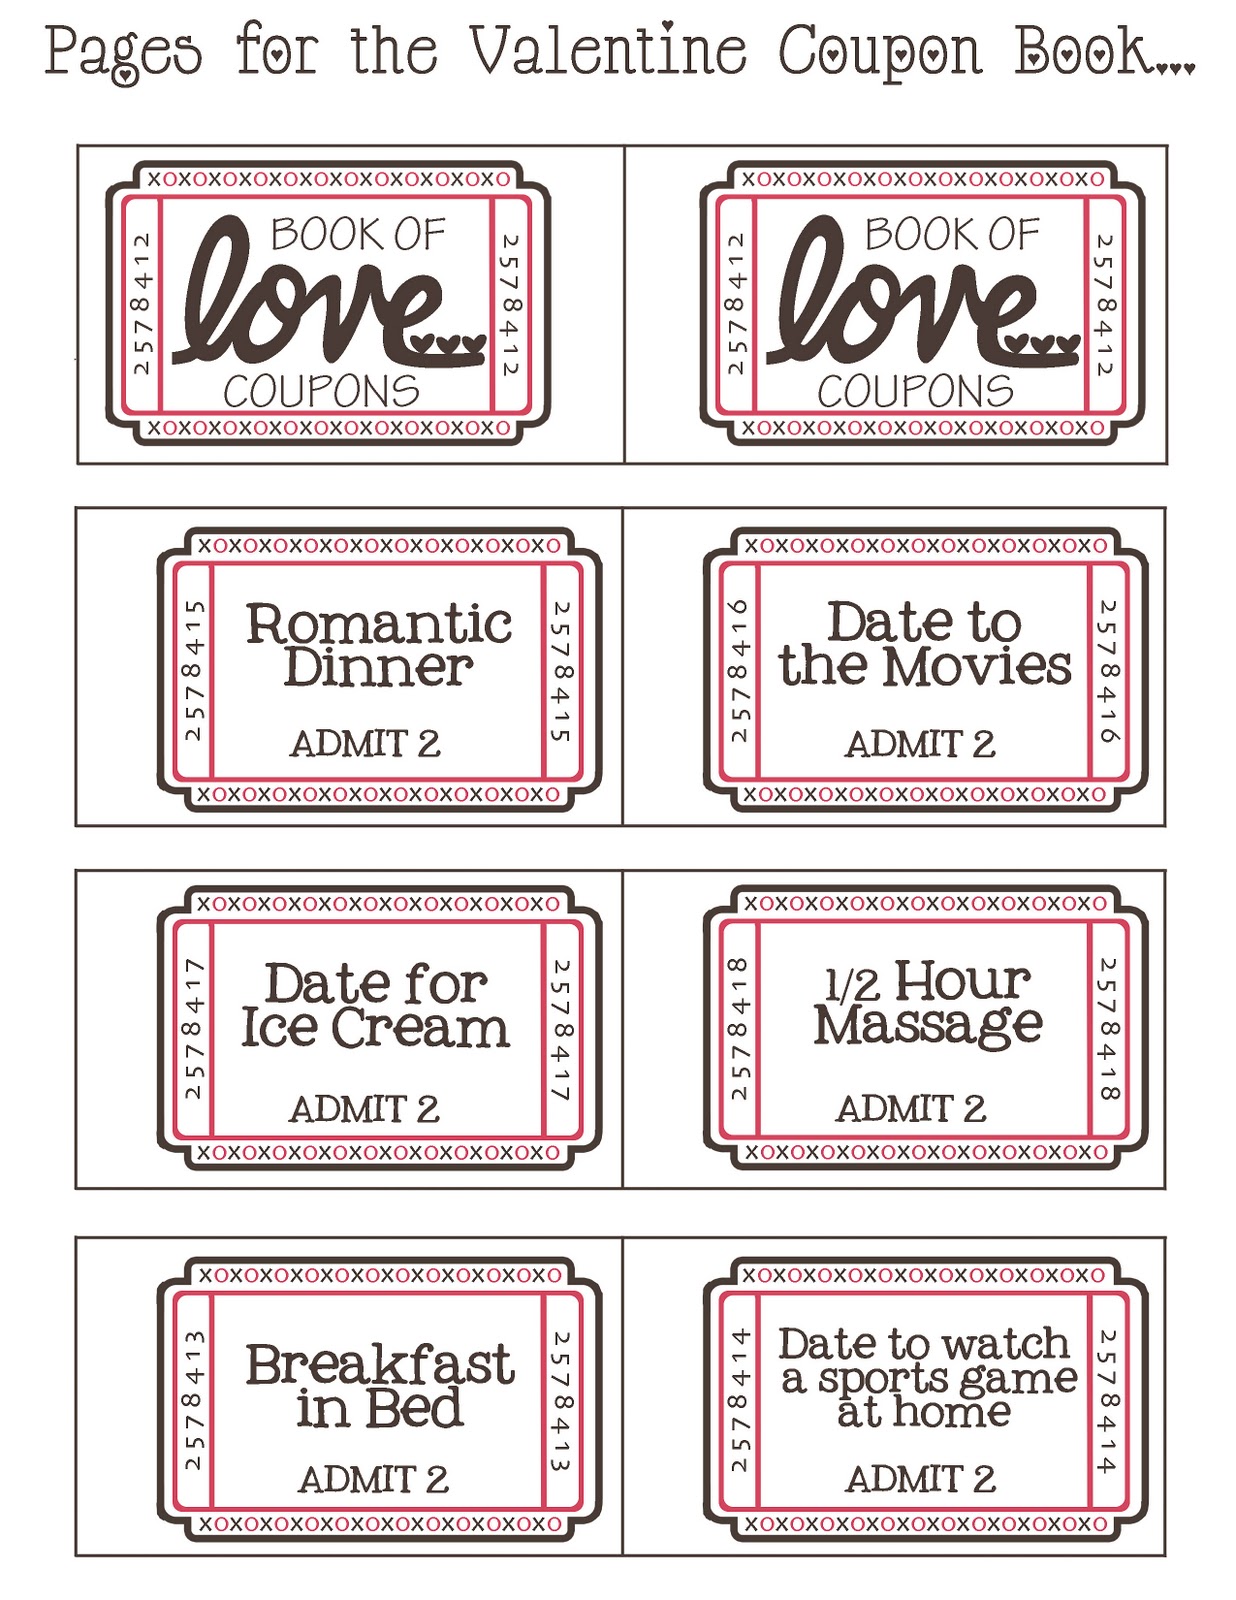 lynn-tan-love-coupons-try-to-make-yours